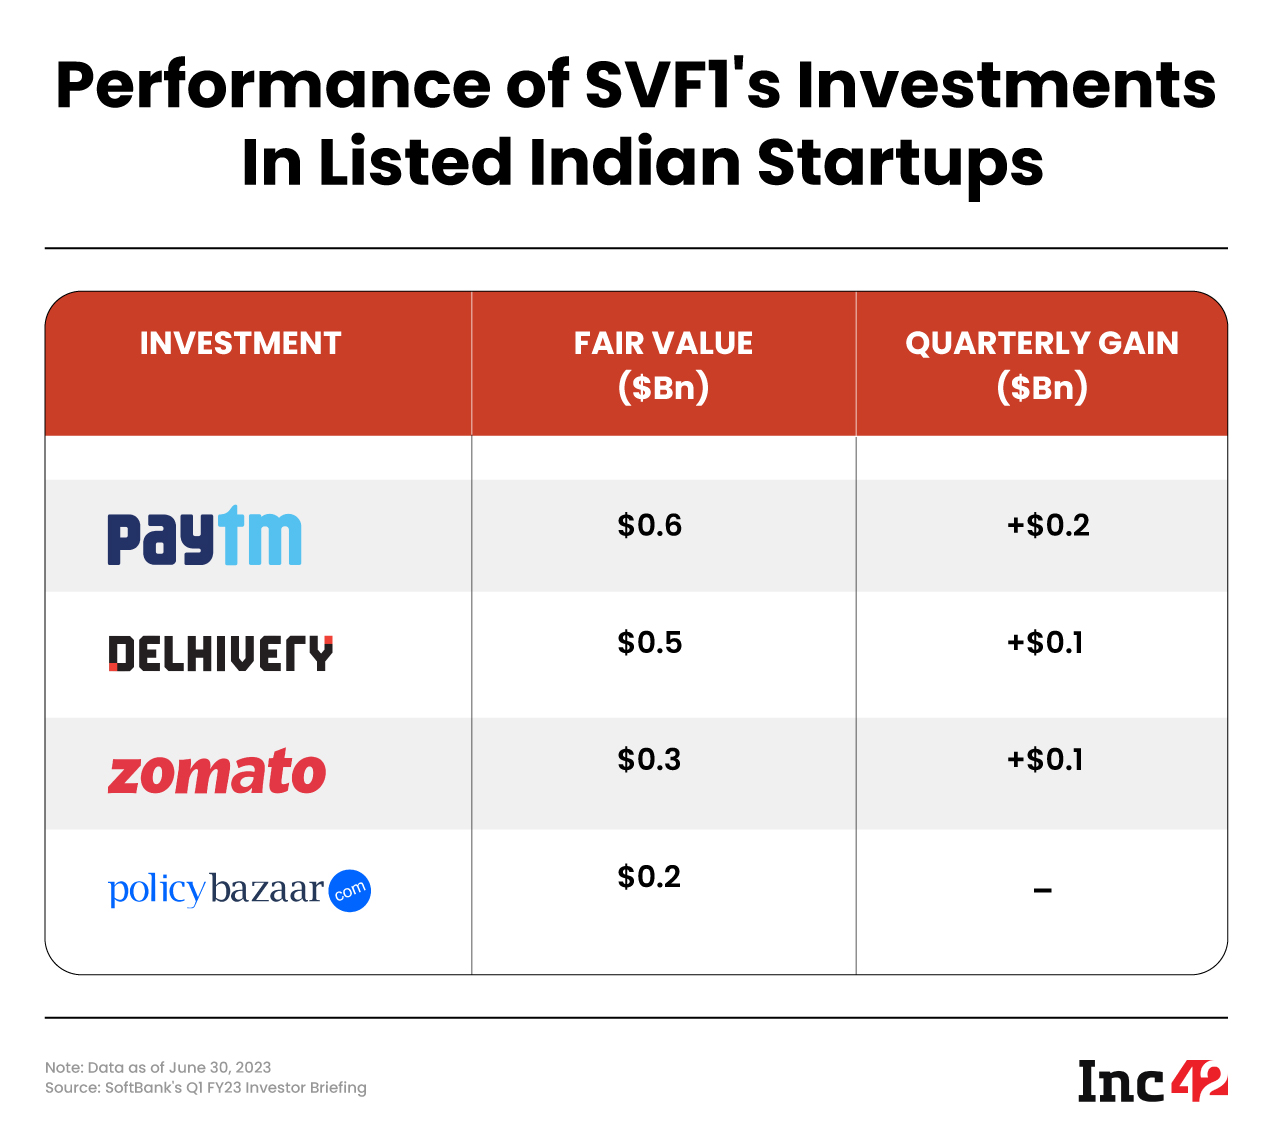 Performance of SVF1's investments in listed Indian startups